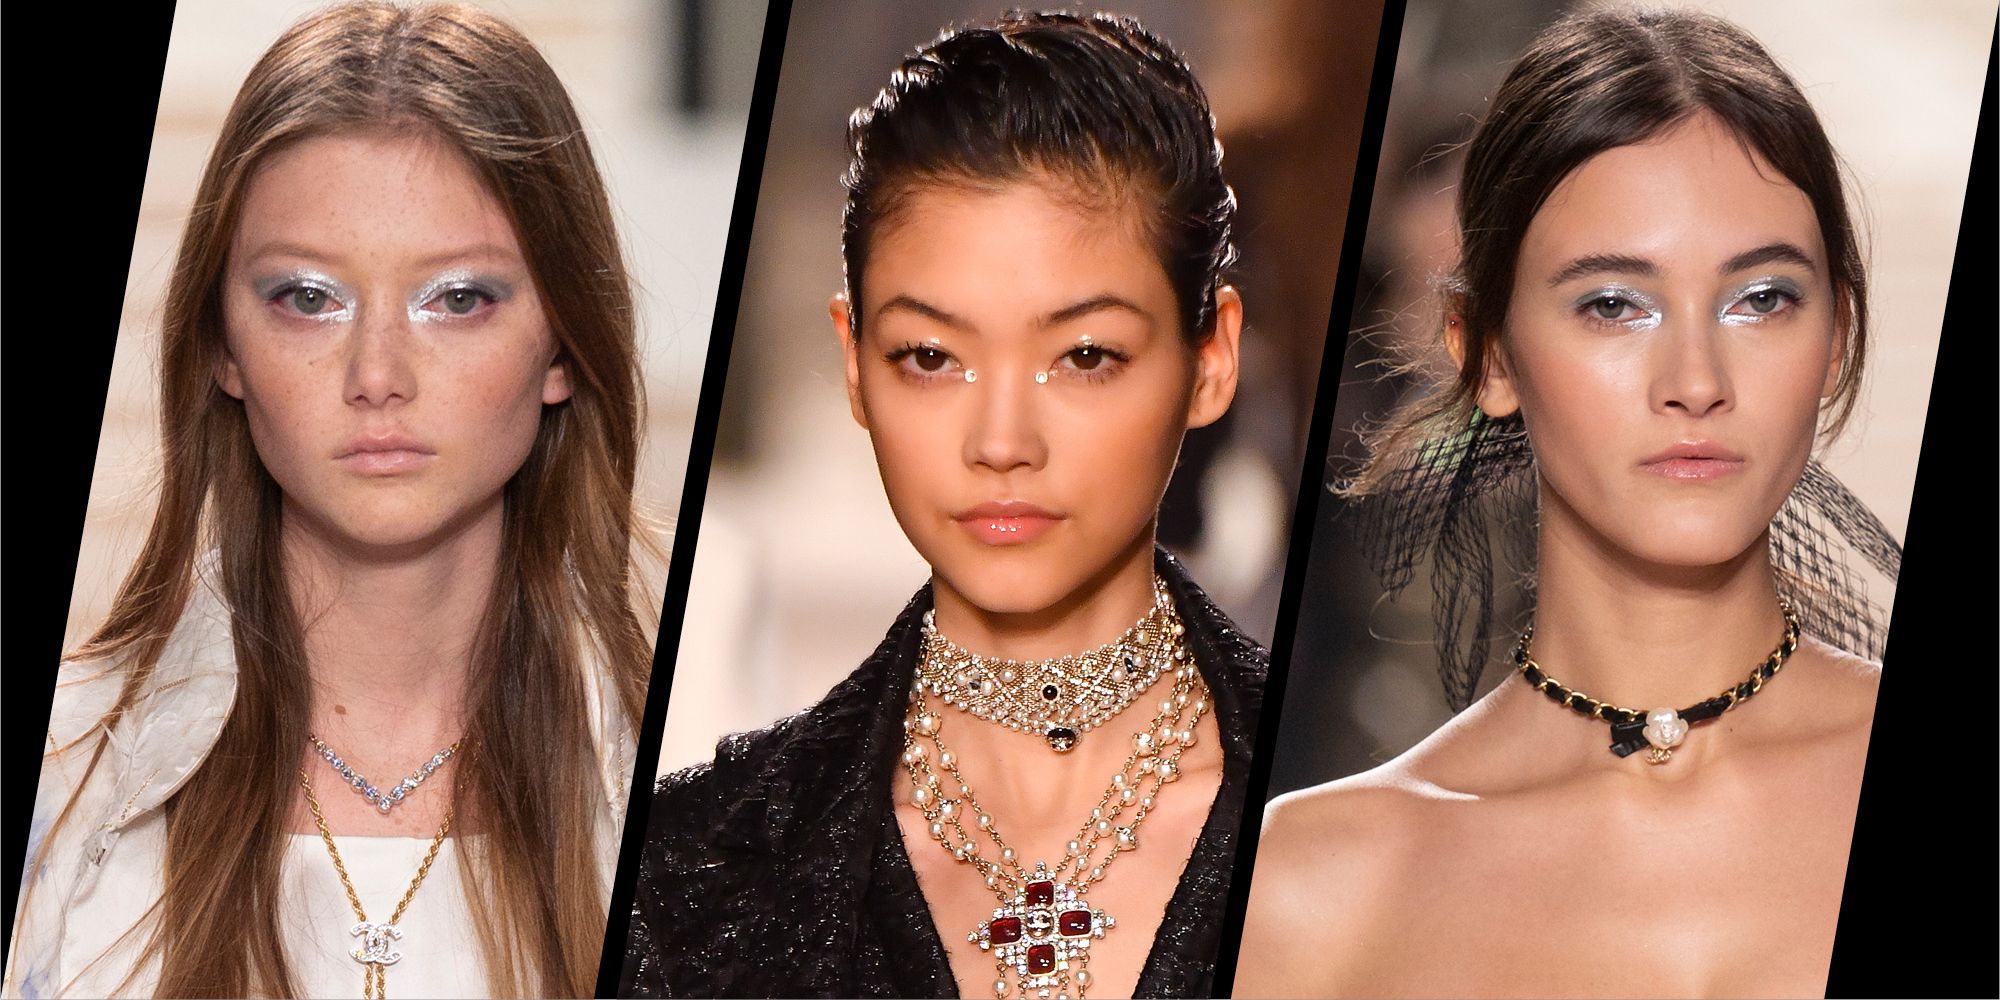 The make-up at Chanel's Metiers d'Art show was perfectly festive